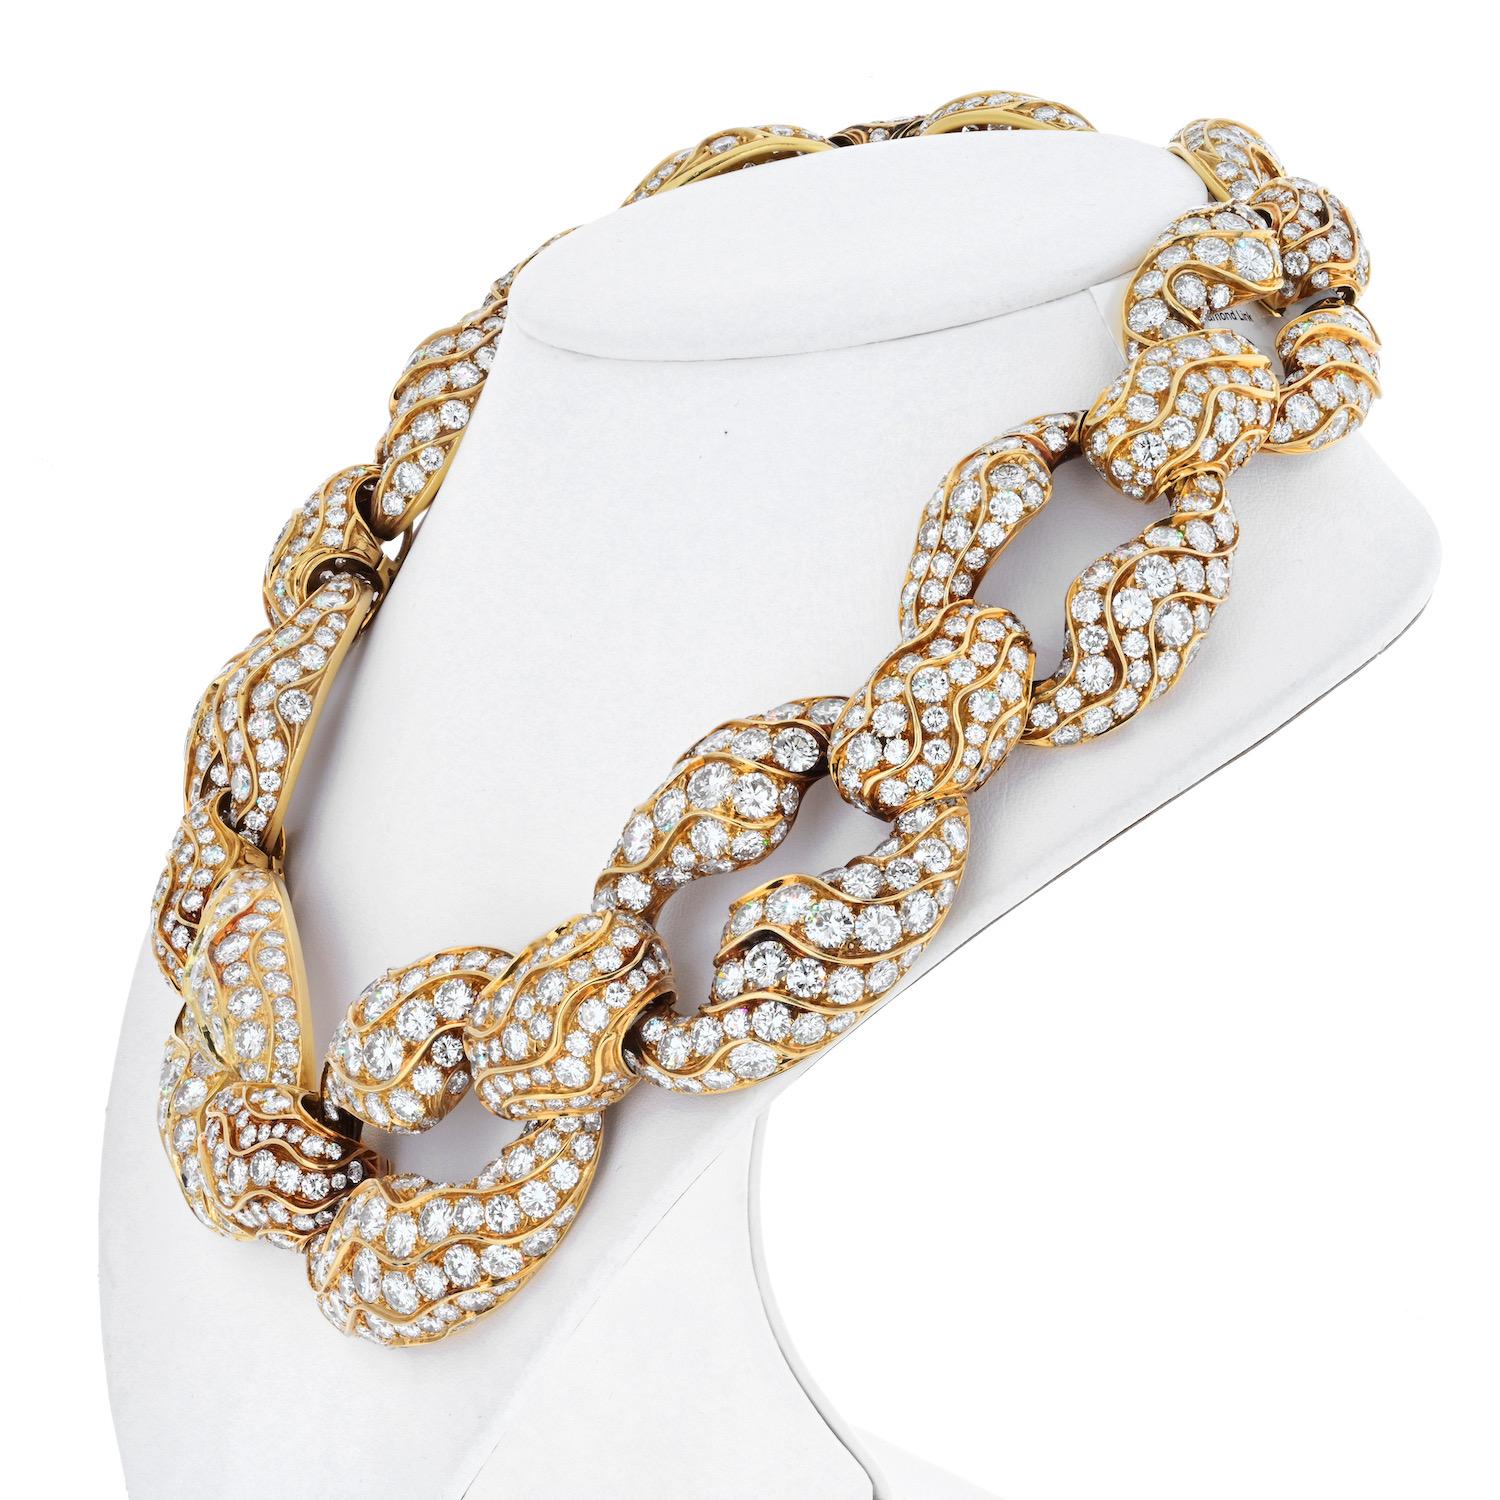 An impressive diamond collar necklace with 250 carats of diamonds. Articulated links look like a large loaf of bread and feel quite crunchy. We love period pieces and this happens to be one of them: this necklace comes to us from 1960's and